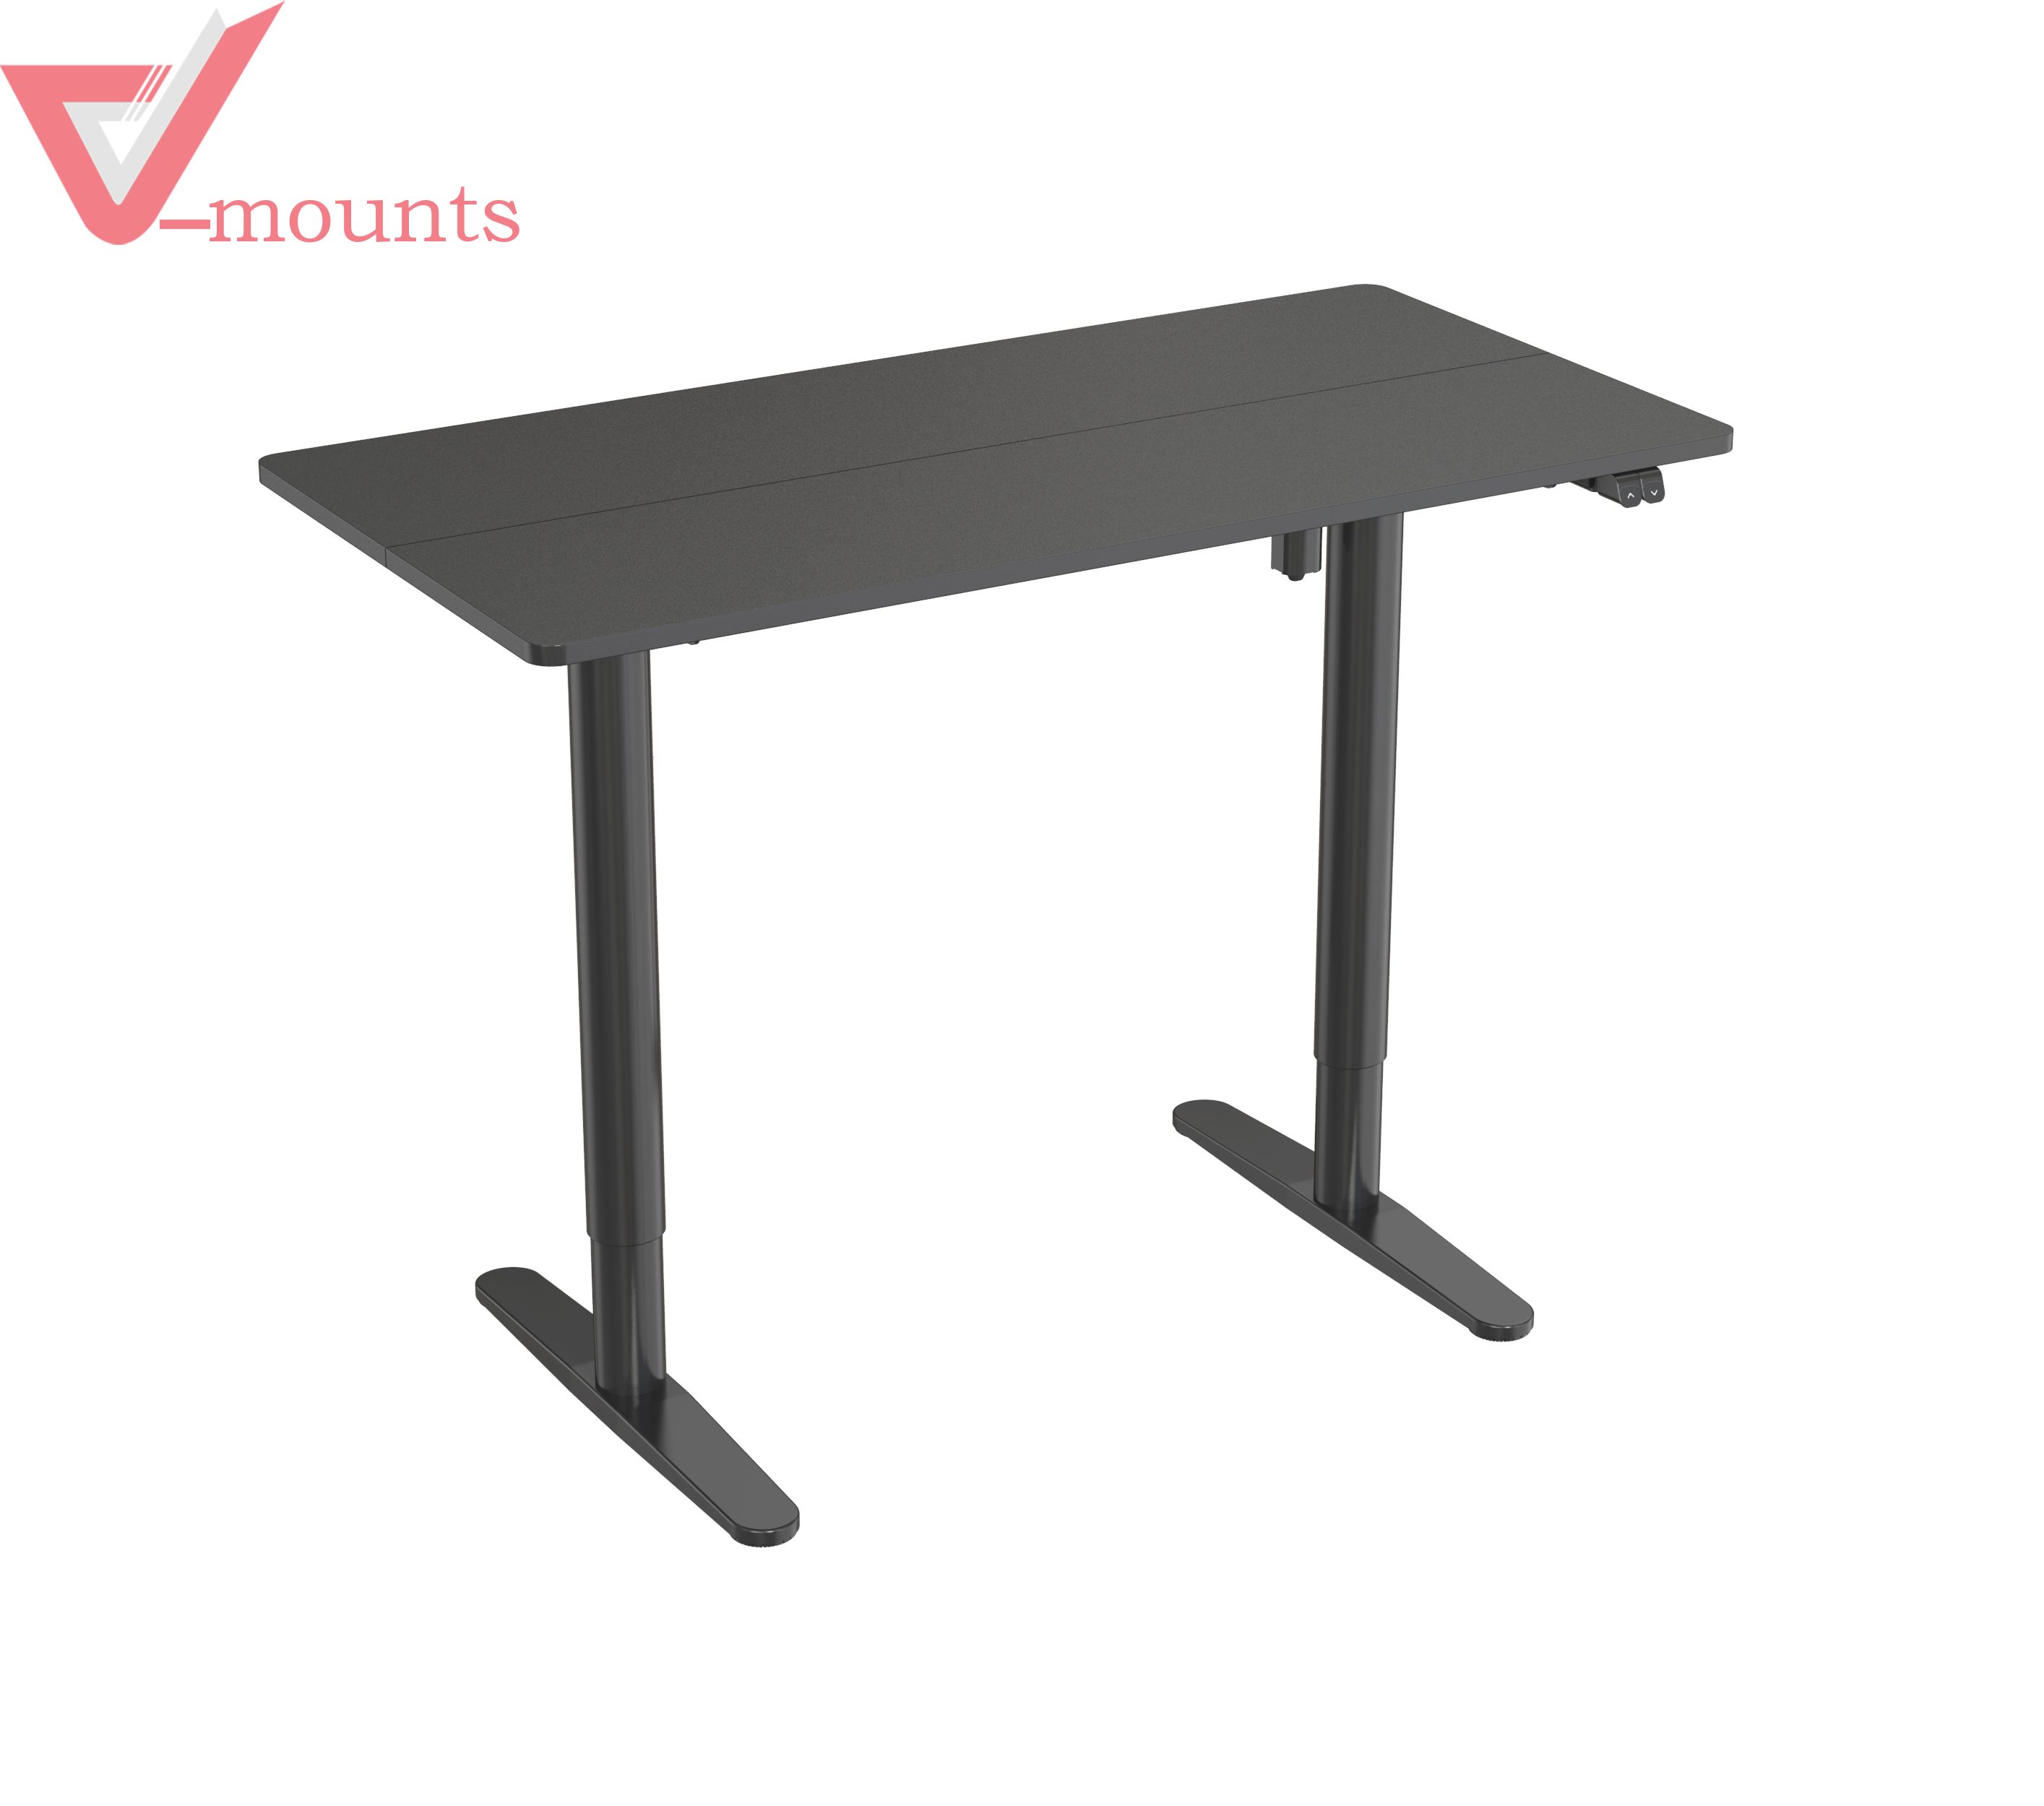 V-mounts Electric Single Motor Height Adjustable Standing Desks With 2 Spliced Boards And Round Legs VM-JSD5-03-2P